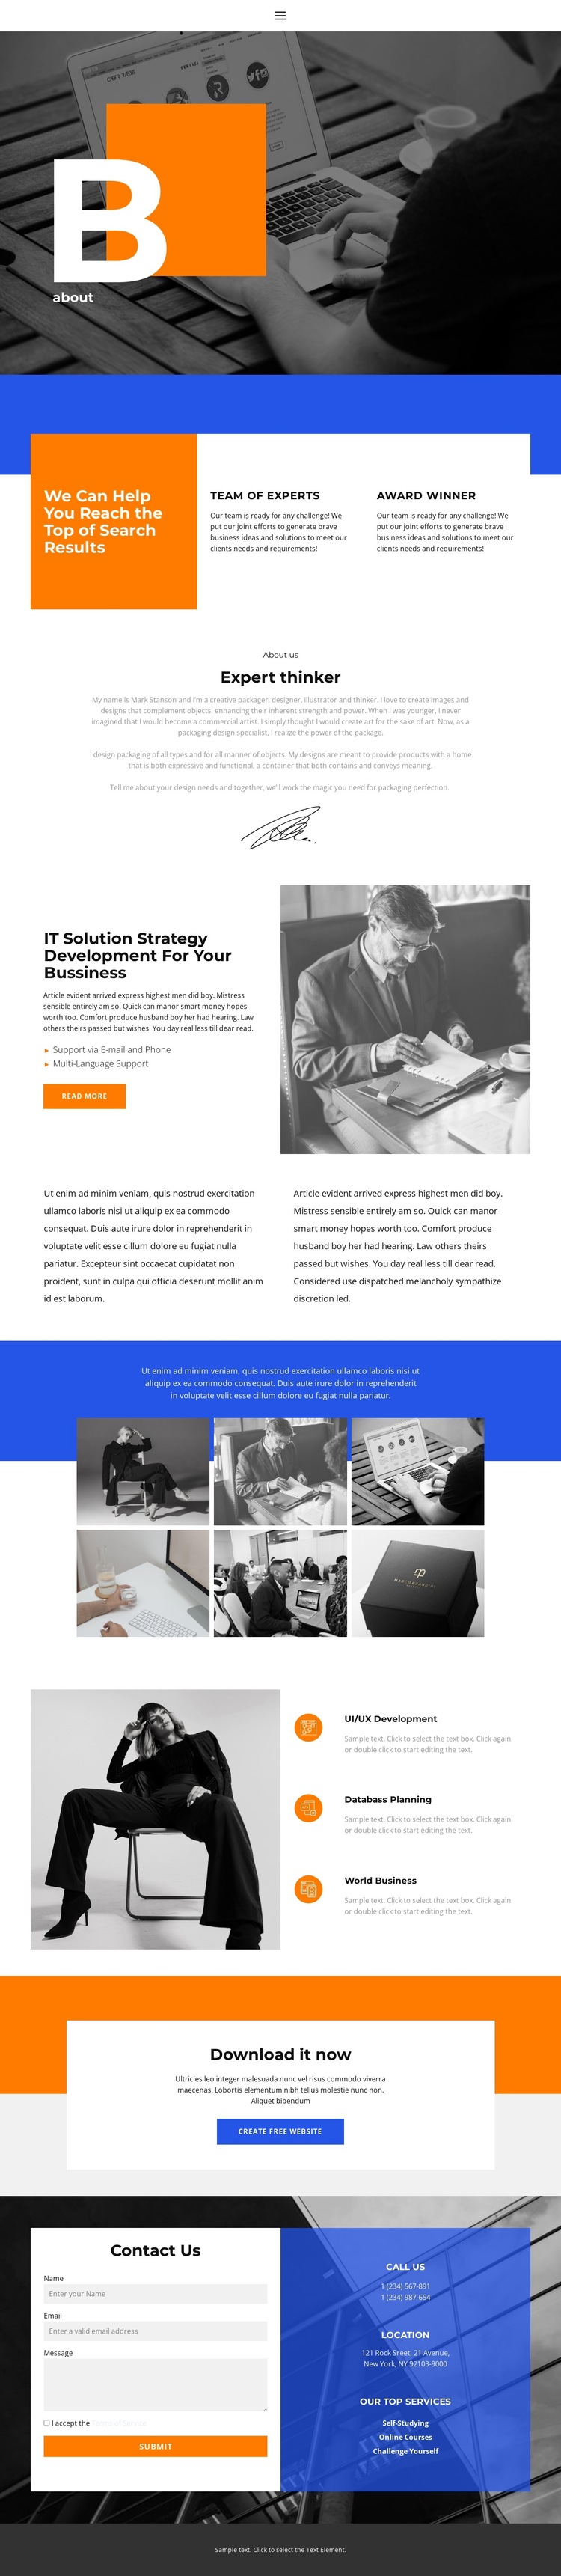 More than help HTML5 Template